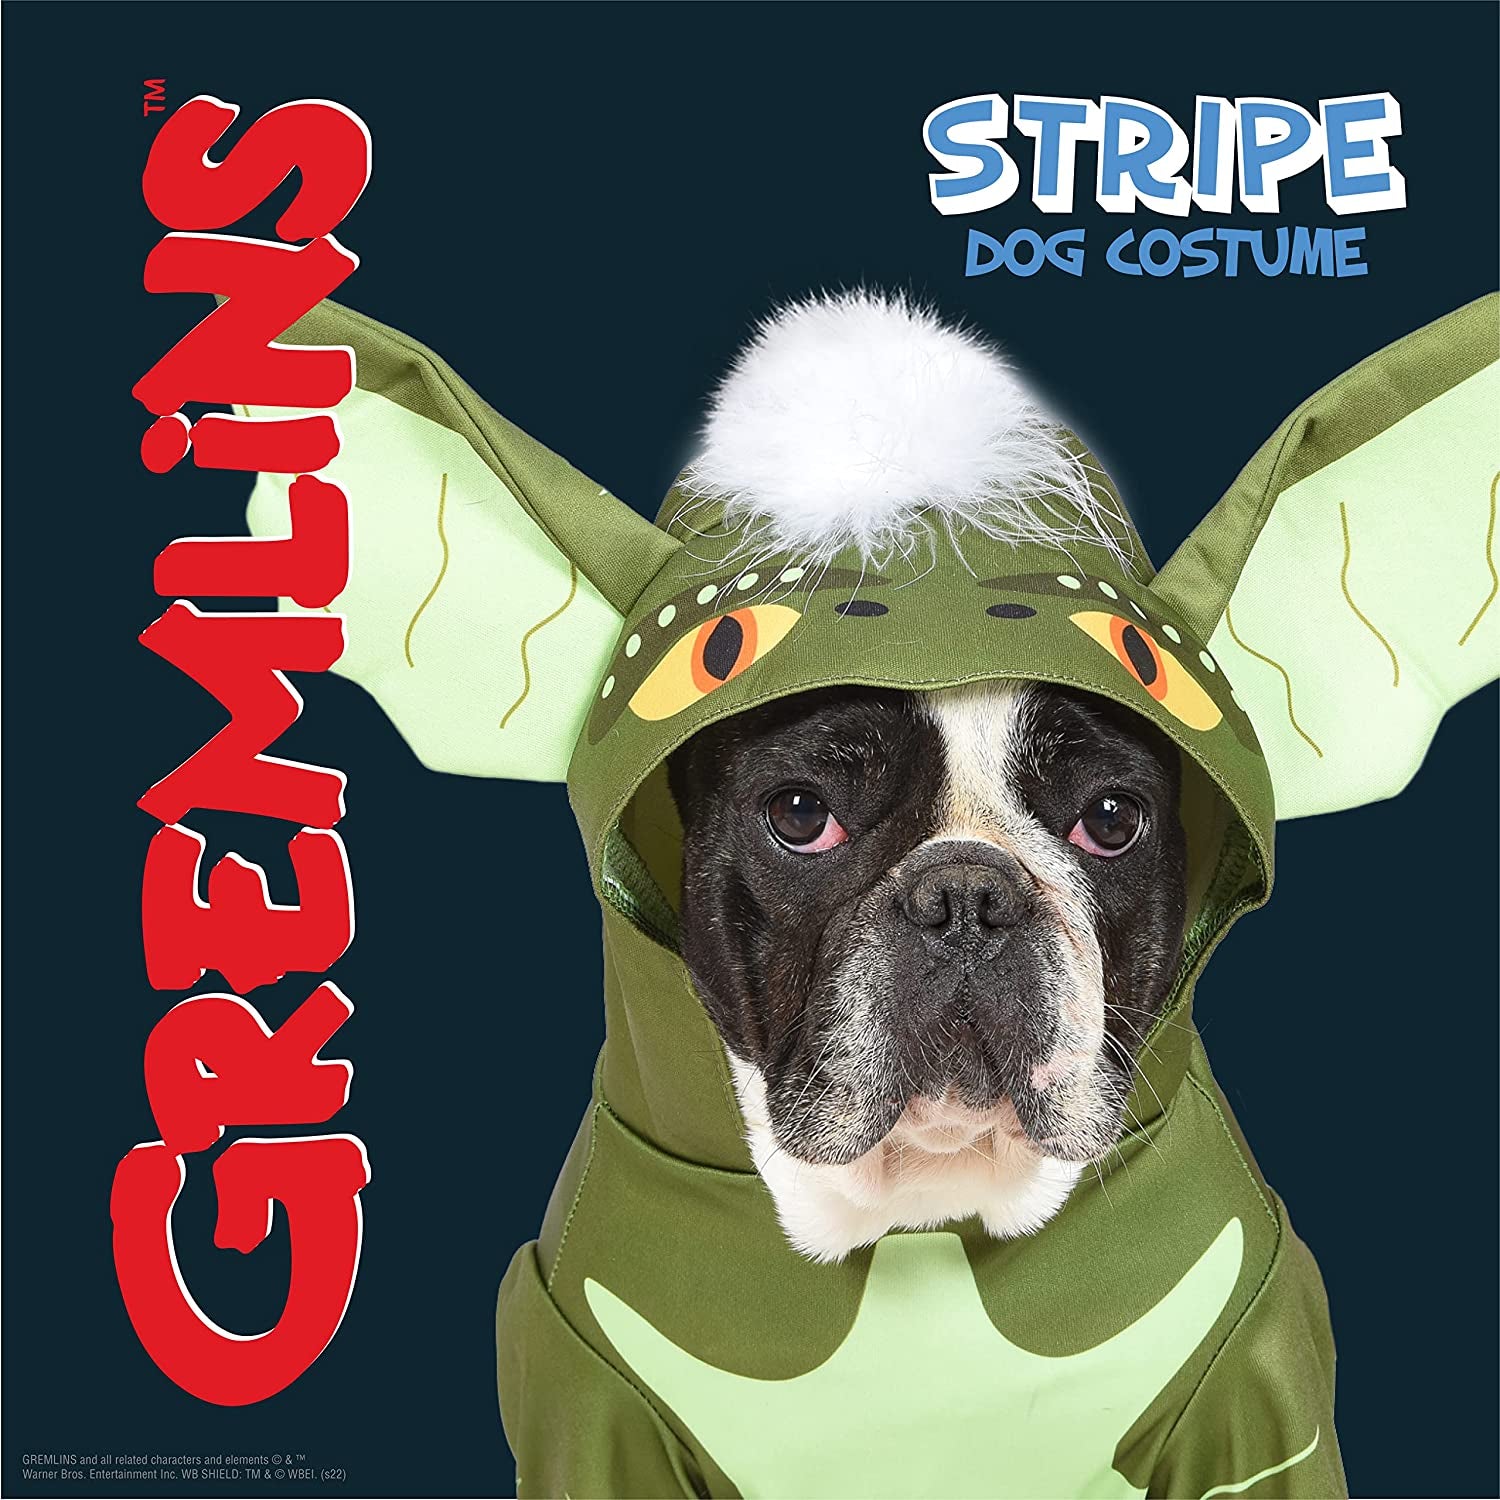 Warner Bros Horror WB: Gremlins Halloween Costume for Dogs with Hood – Size Large | Cute Pet Costumes, Scary Costumes for Dogs| Officially Licensed Gremlins Pet Products, Green (FF23213)